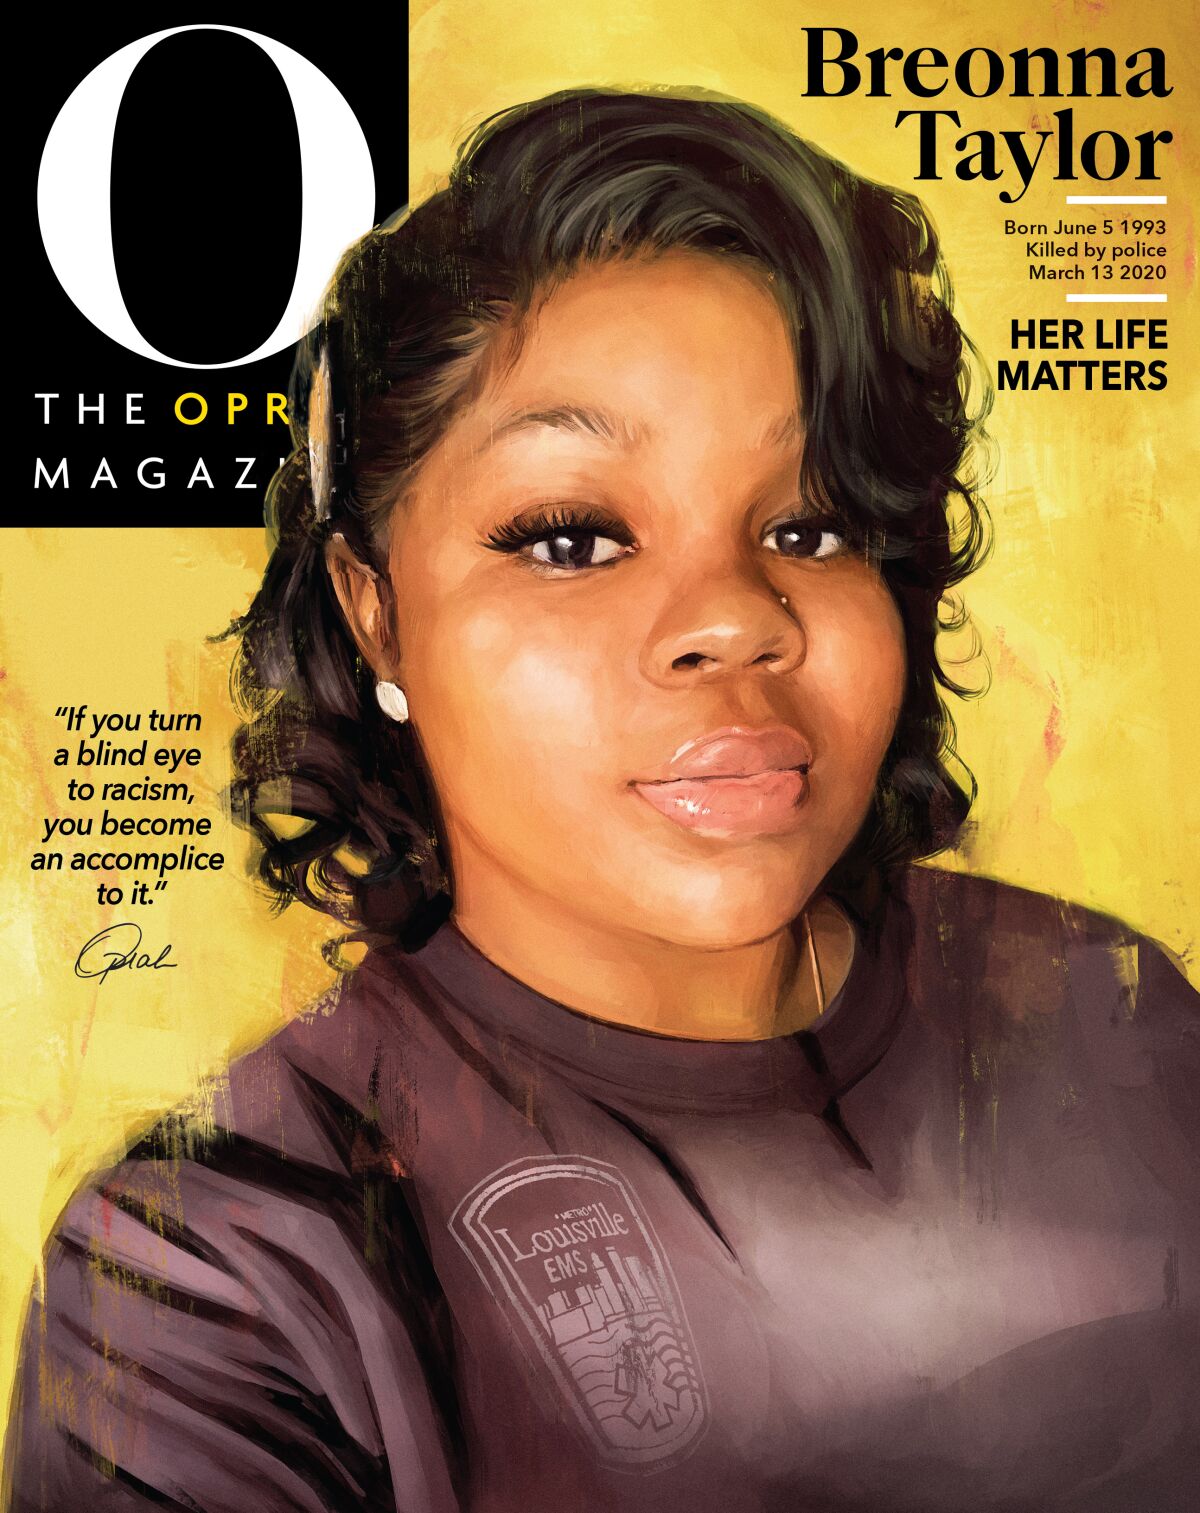 Breonna Taylor on the cover of O magazine